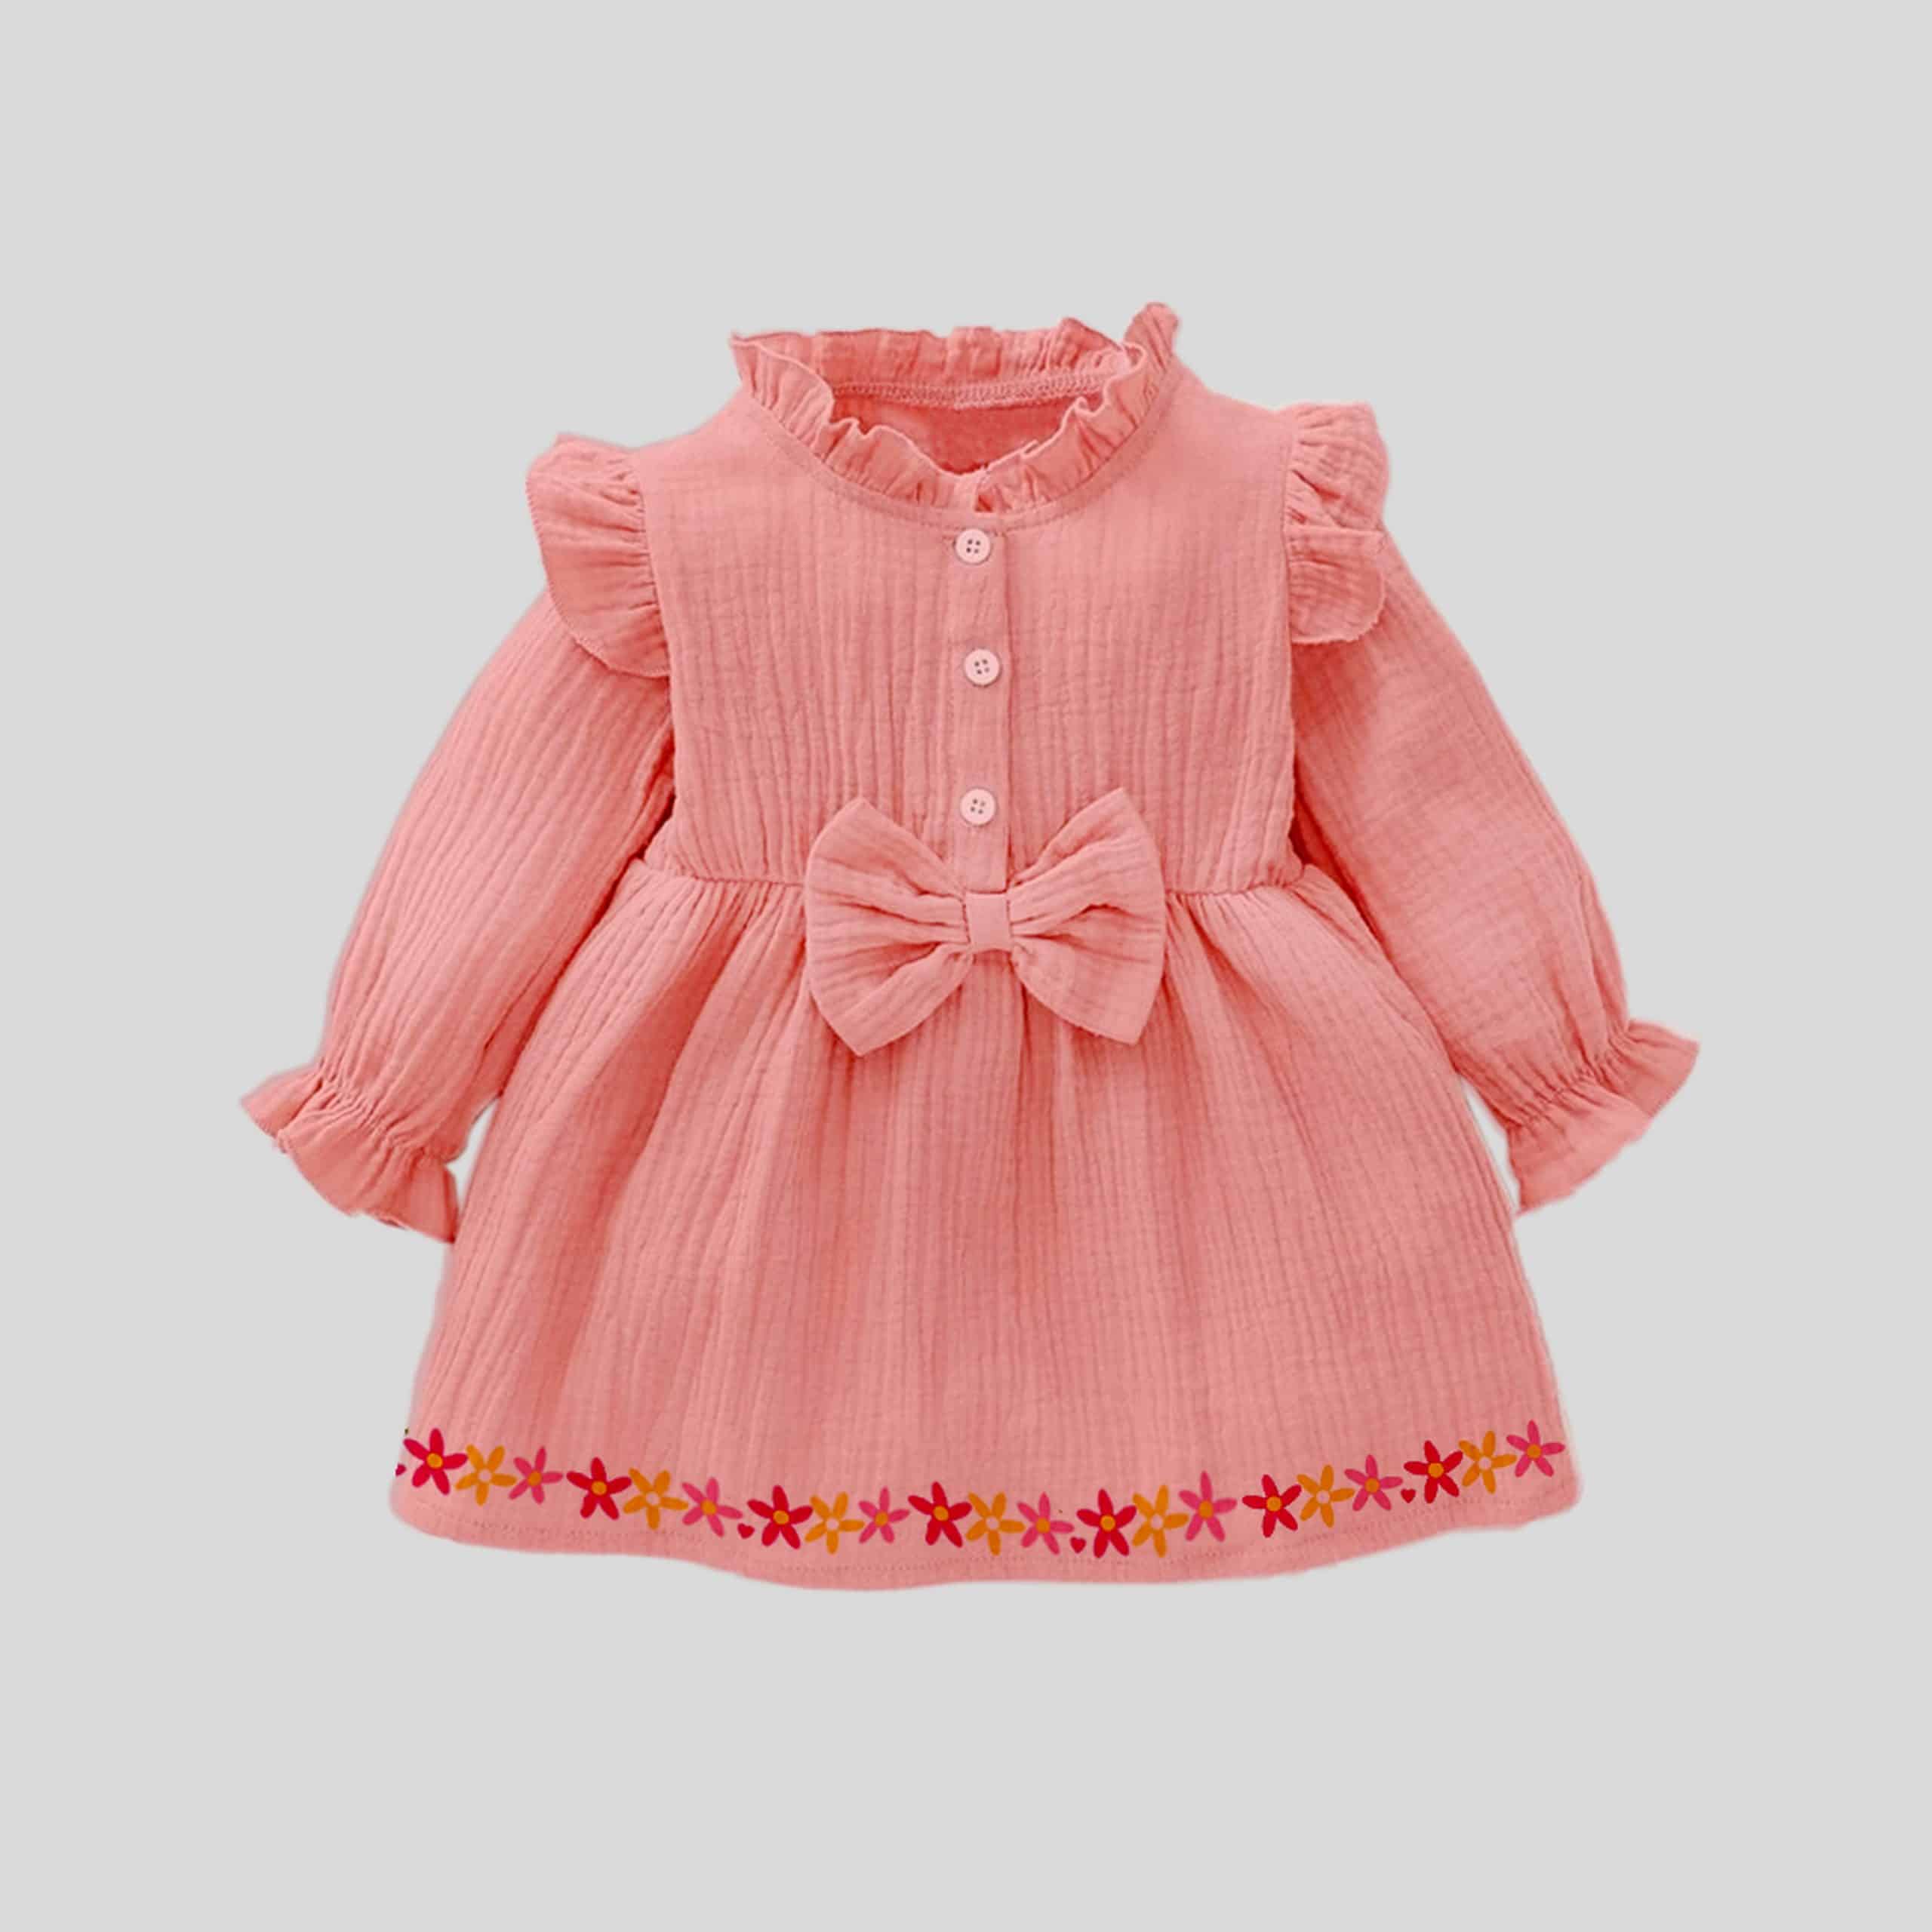 Girls delicate pink frill collar full sleeve dress with a cute bow and floral print trim- RKFCW186